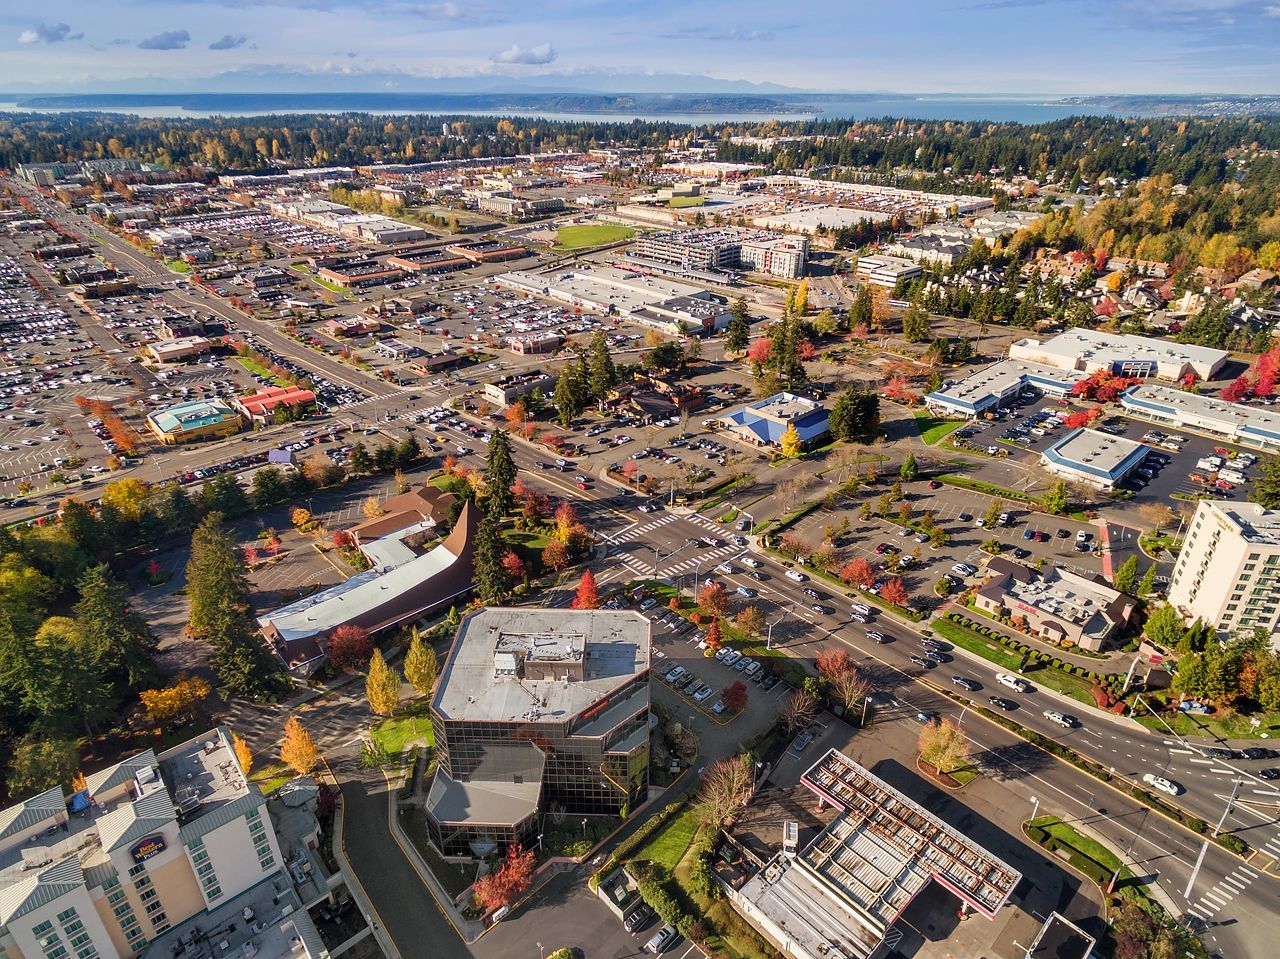 Downtown Federal Way with an aerial view overlooking the main business park near Wild Waves.